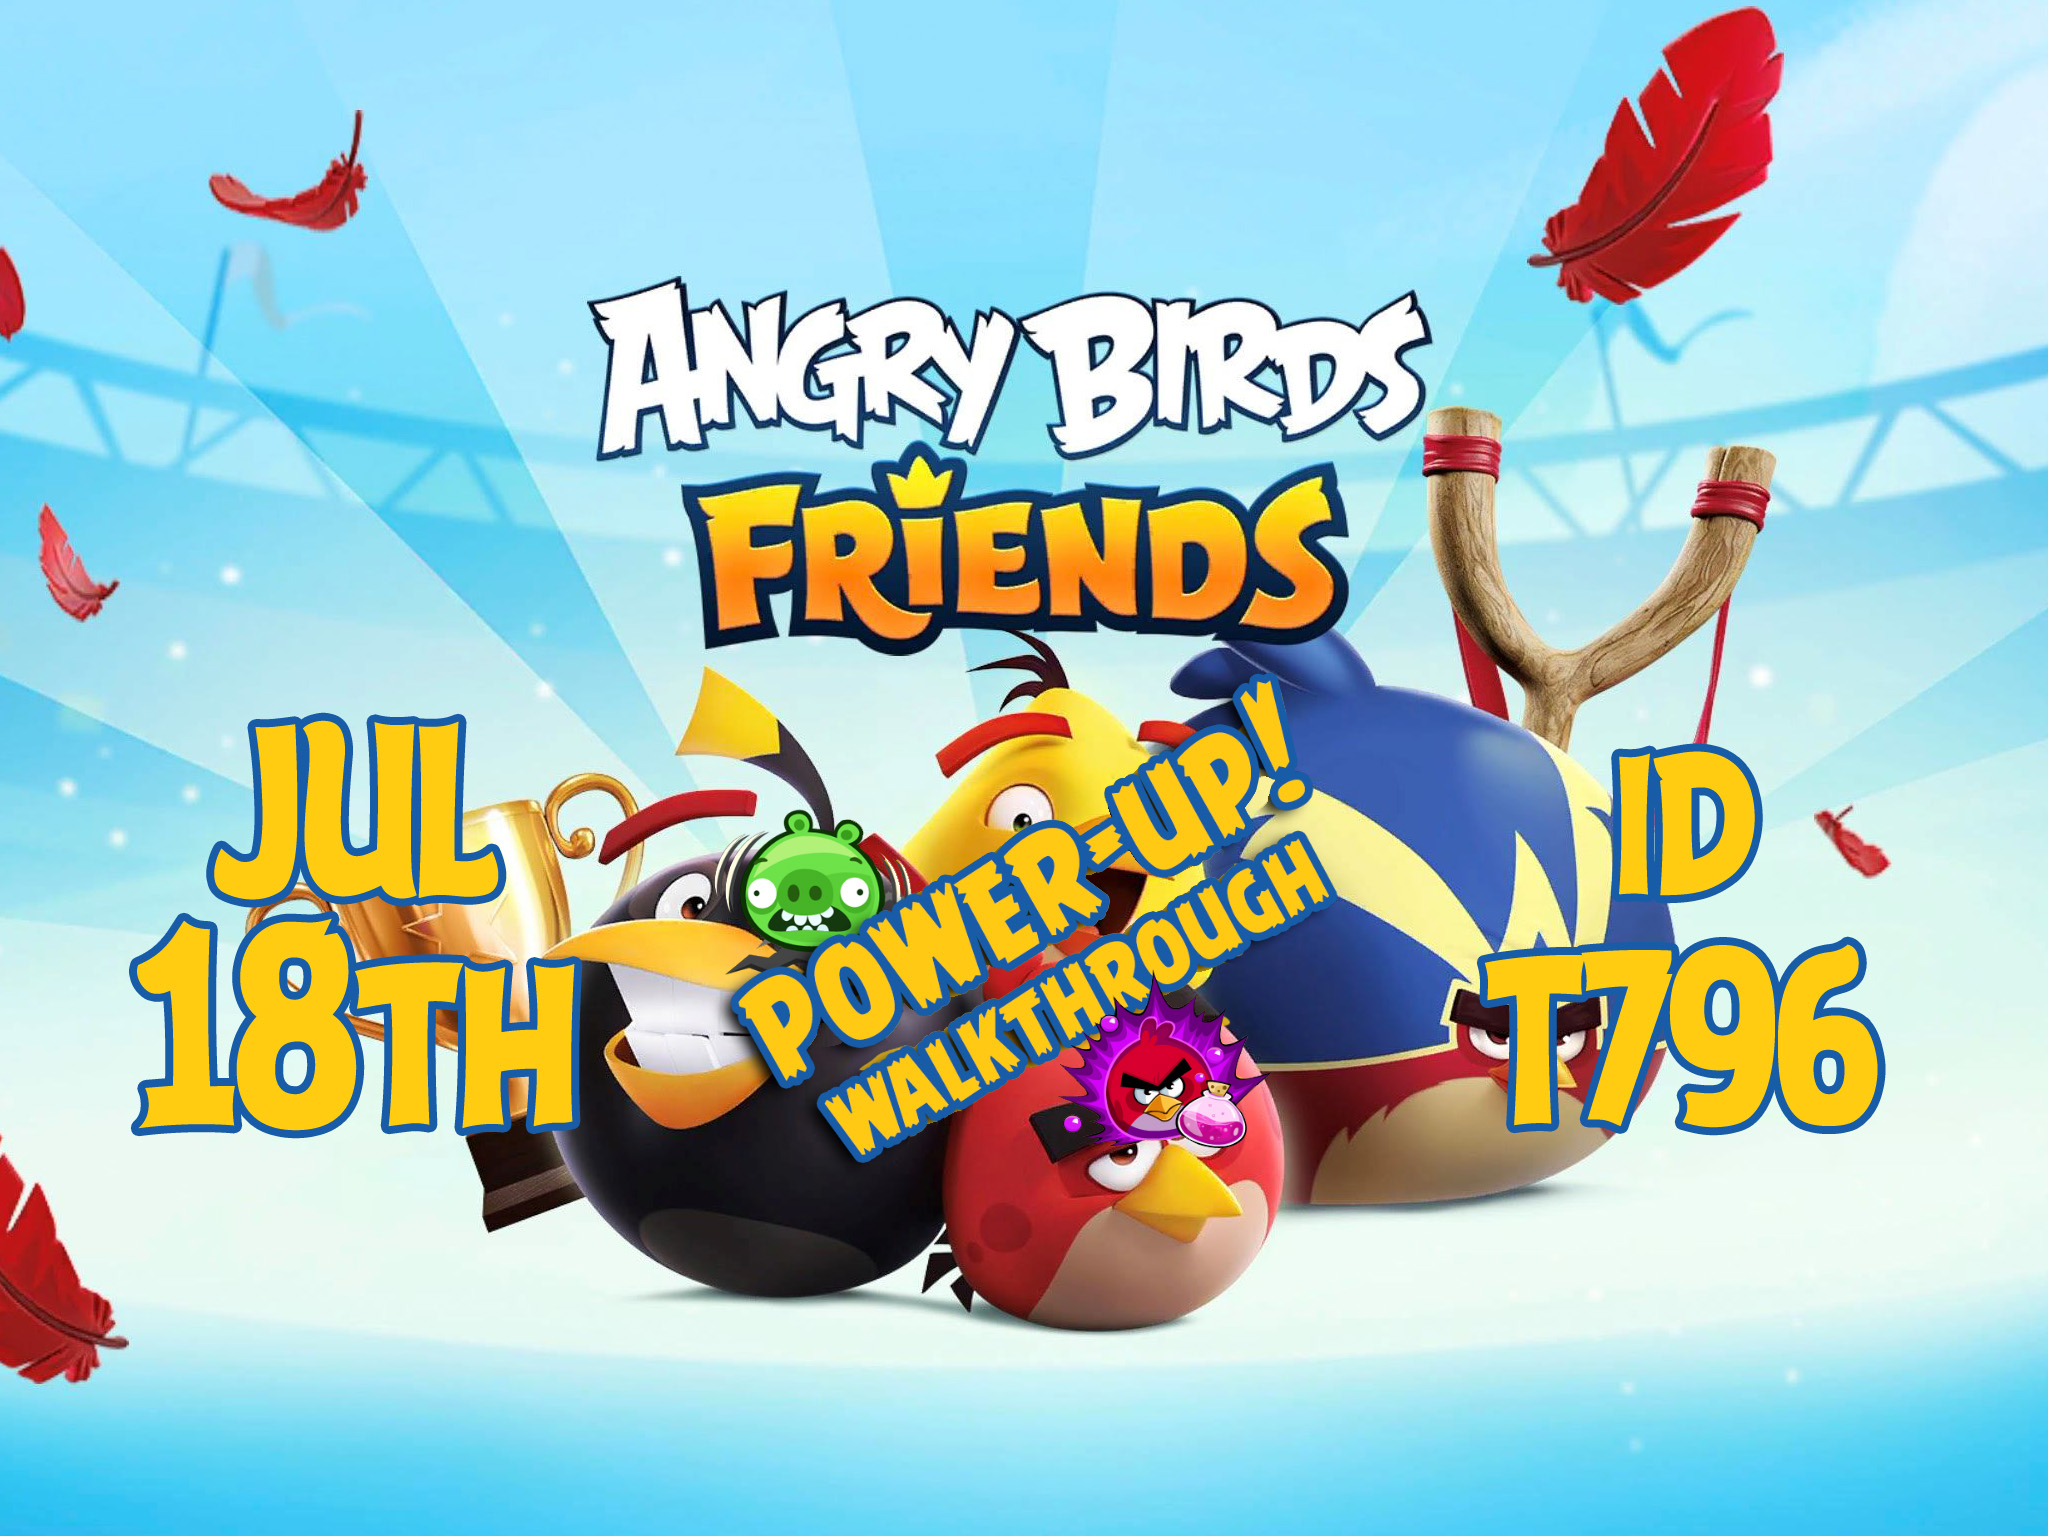 Angry-Birds-Friends-Tournament-T796-Feature-Image-PU